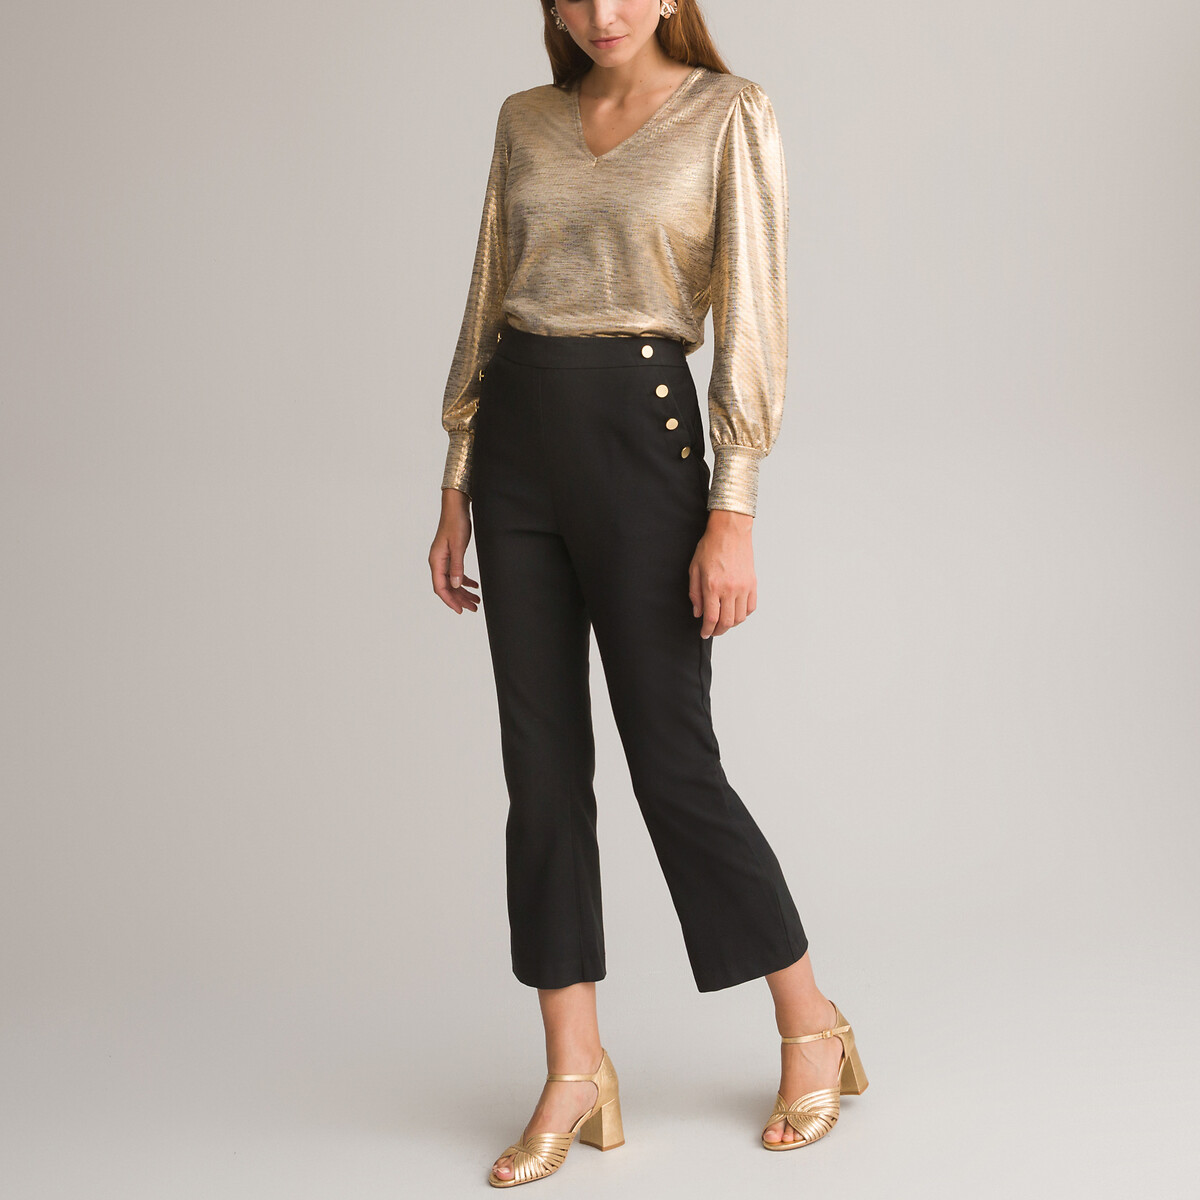 Recycled Cropped Flared Trousers, Length 25.5"